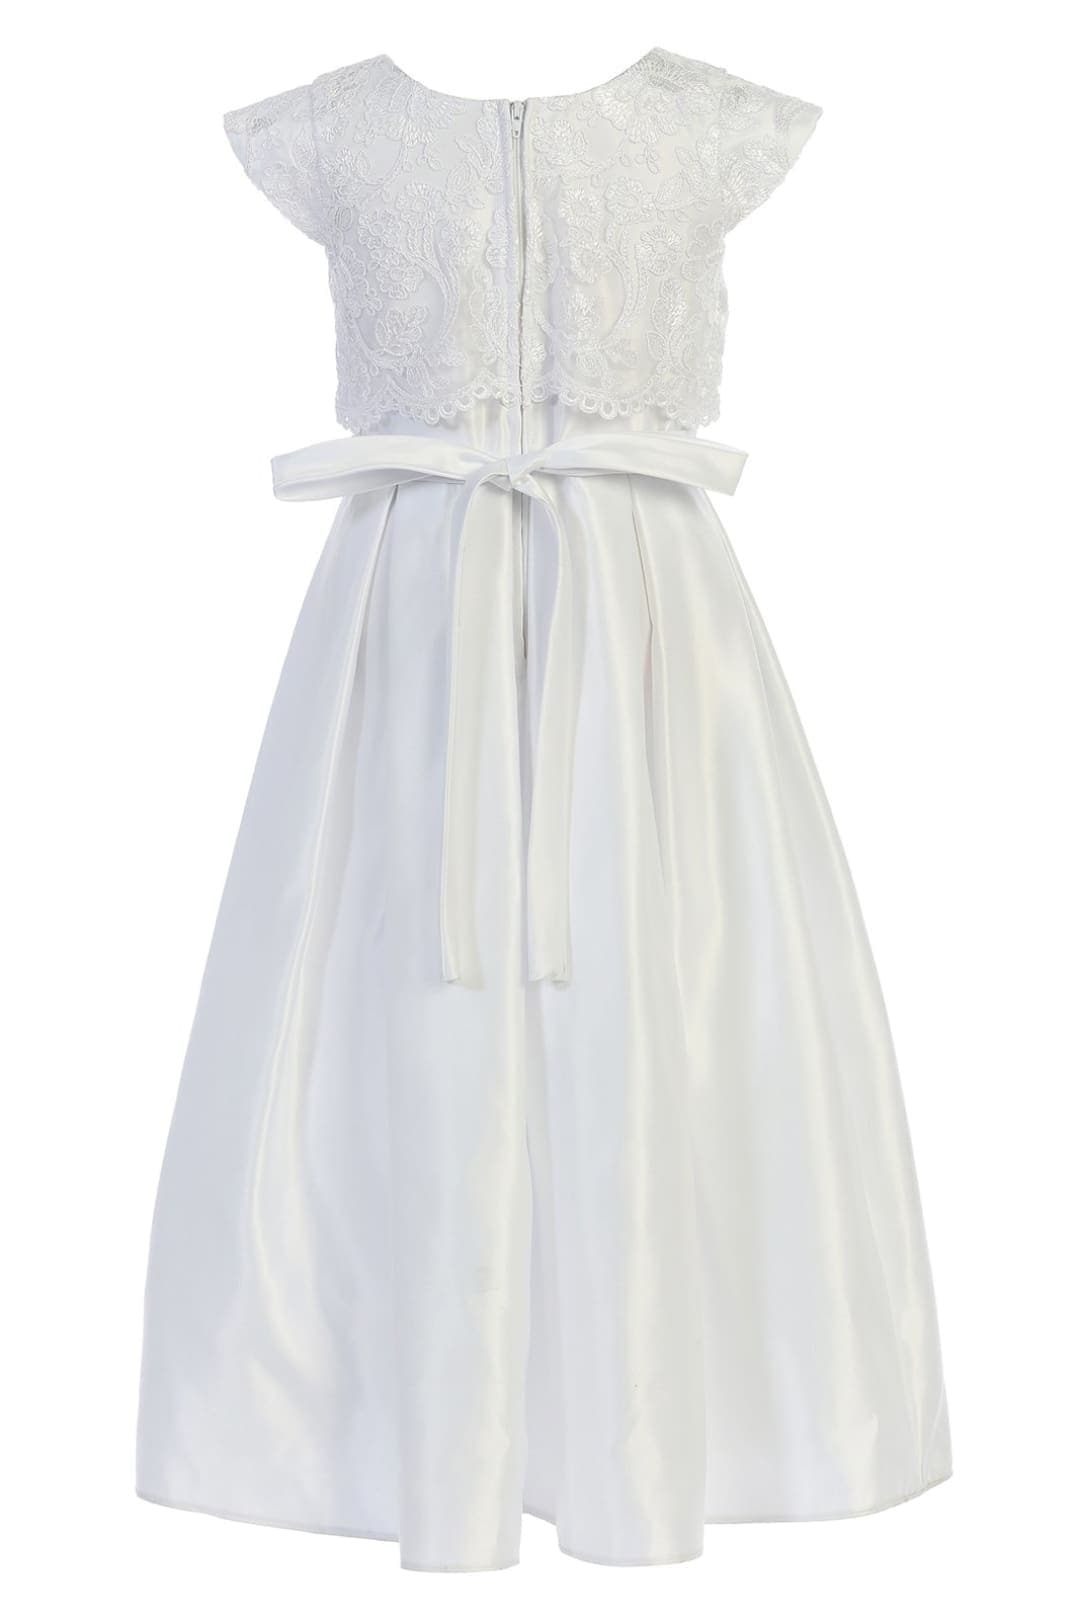 Lace and Satin Flower Girl Dress with Pockets - LAK785